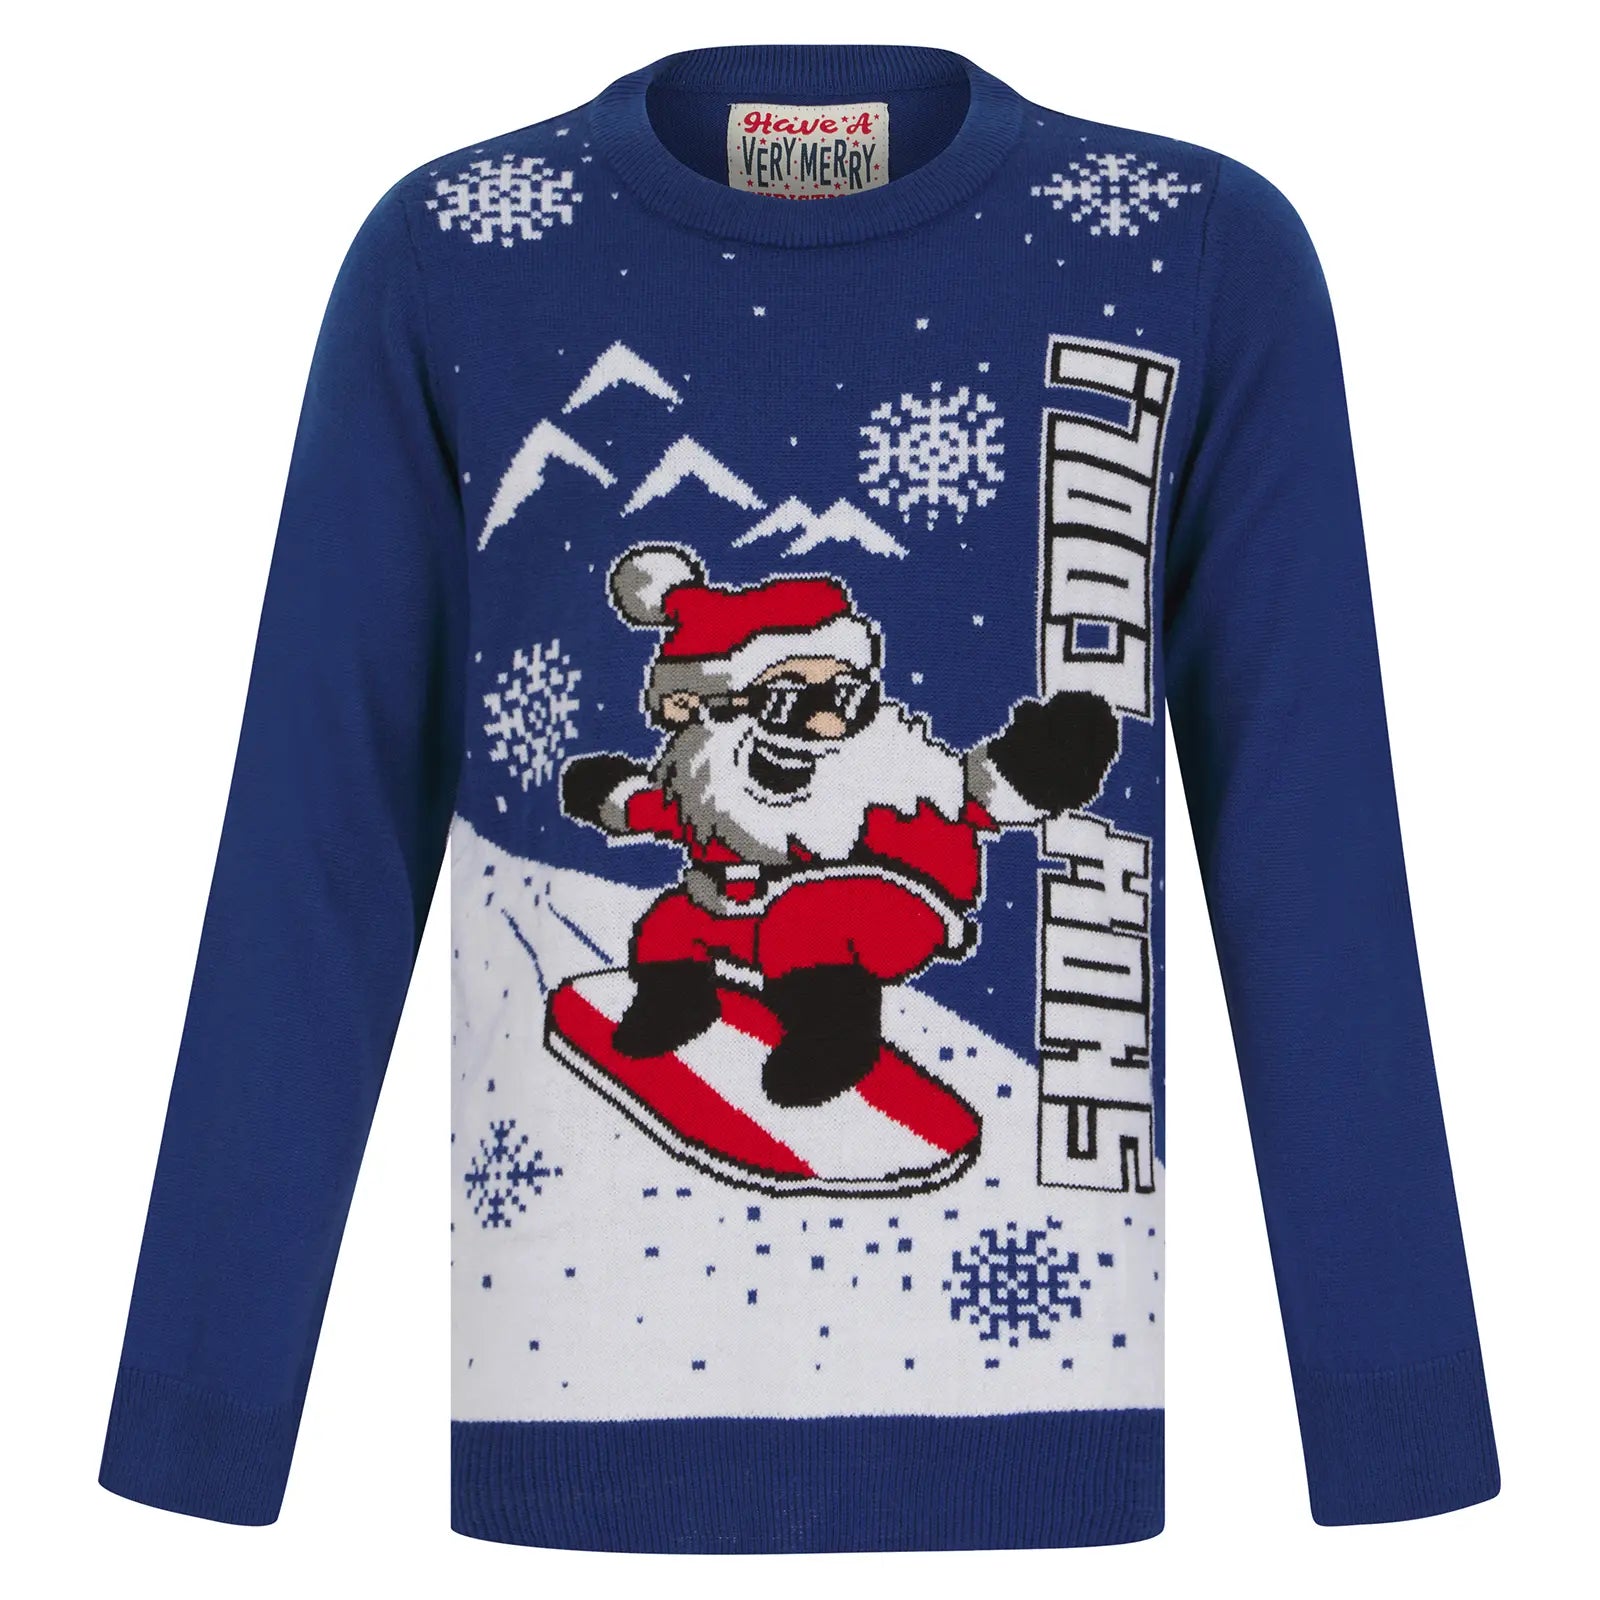 blue knit snow cool jumper featuring santa on red and white striped snowboard design, with snowflakes and snow mountains in background